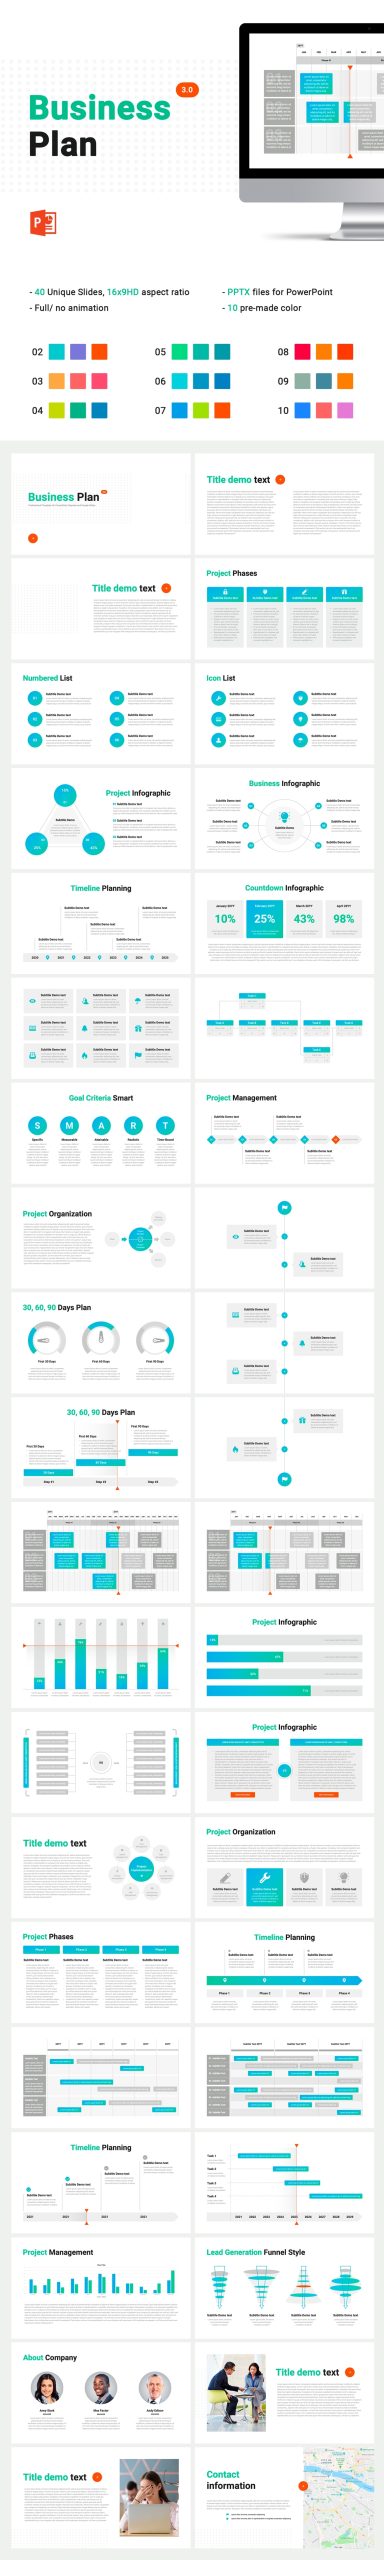 Business Plan Powerpoint Template - Download Now! throughout Business Plan Template Powerpoint Free Download